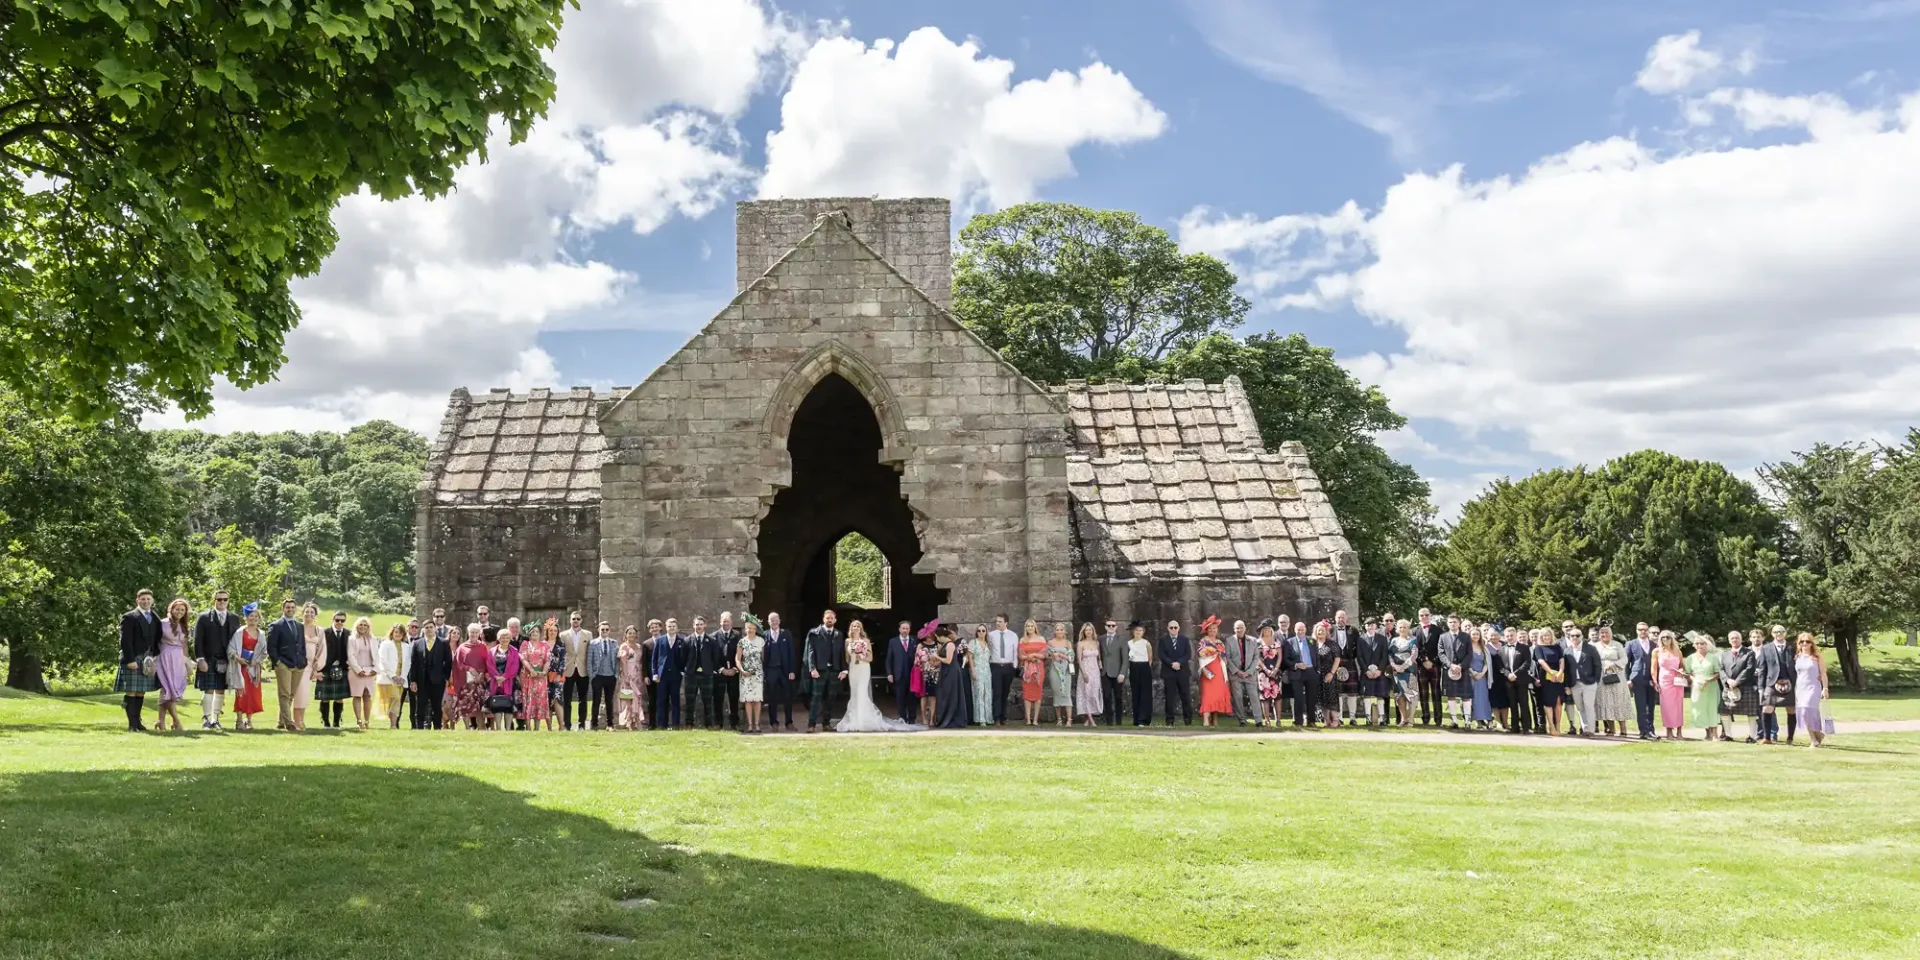 Large group of people gathered for a wedding ceremony in front of an old stone archway in a lush green park.